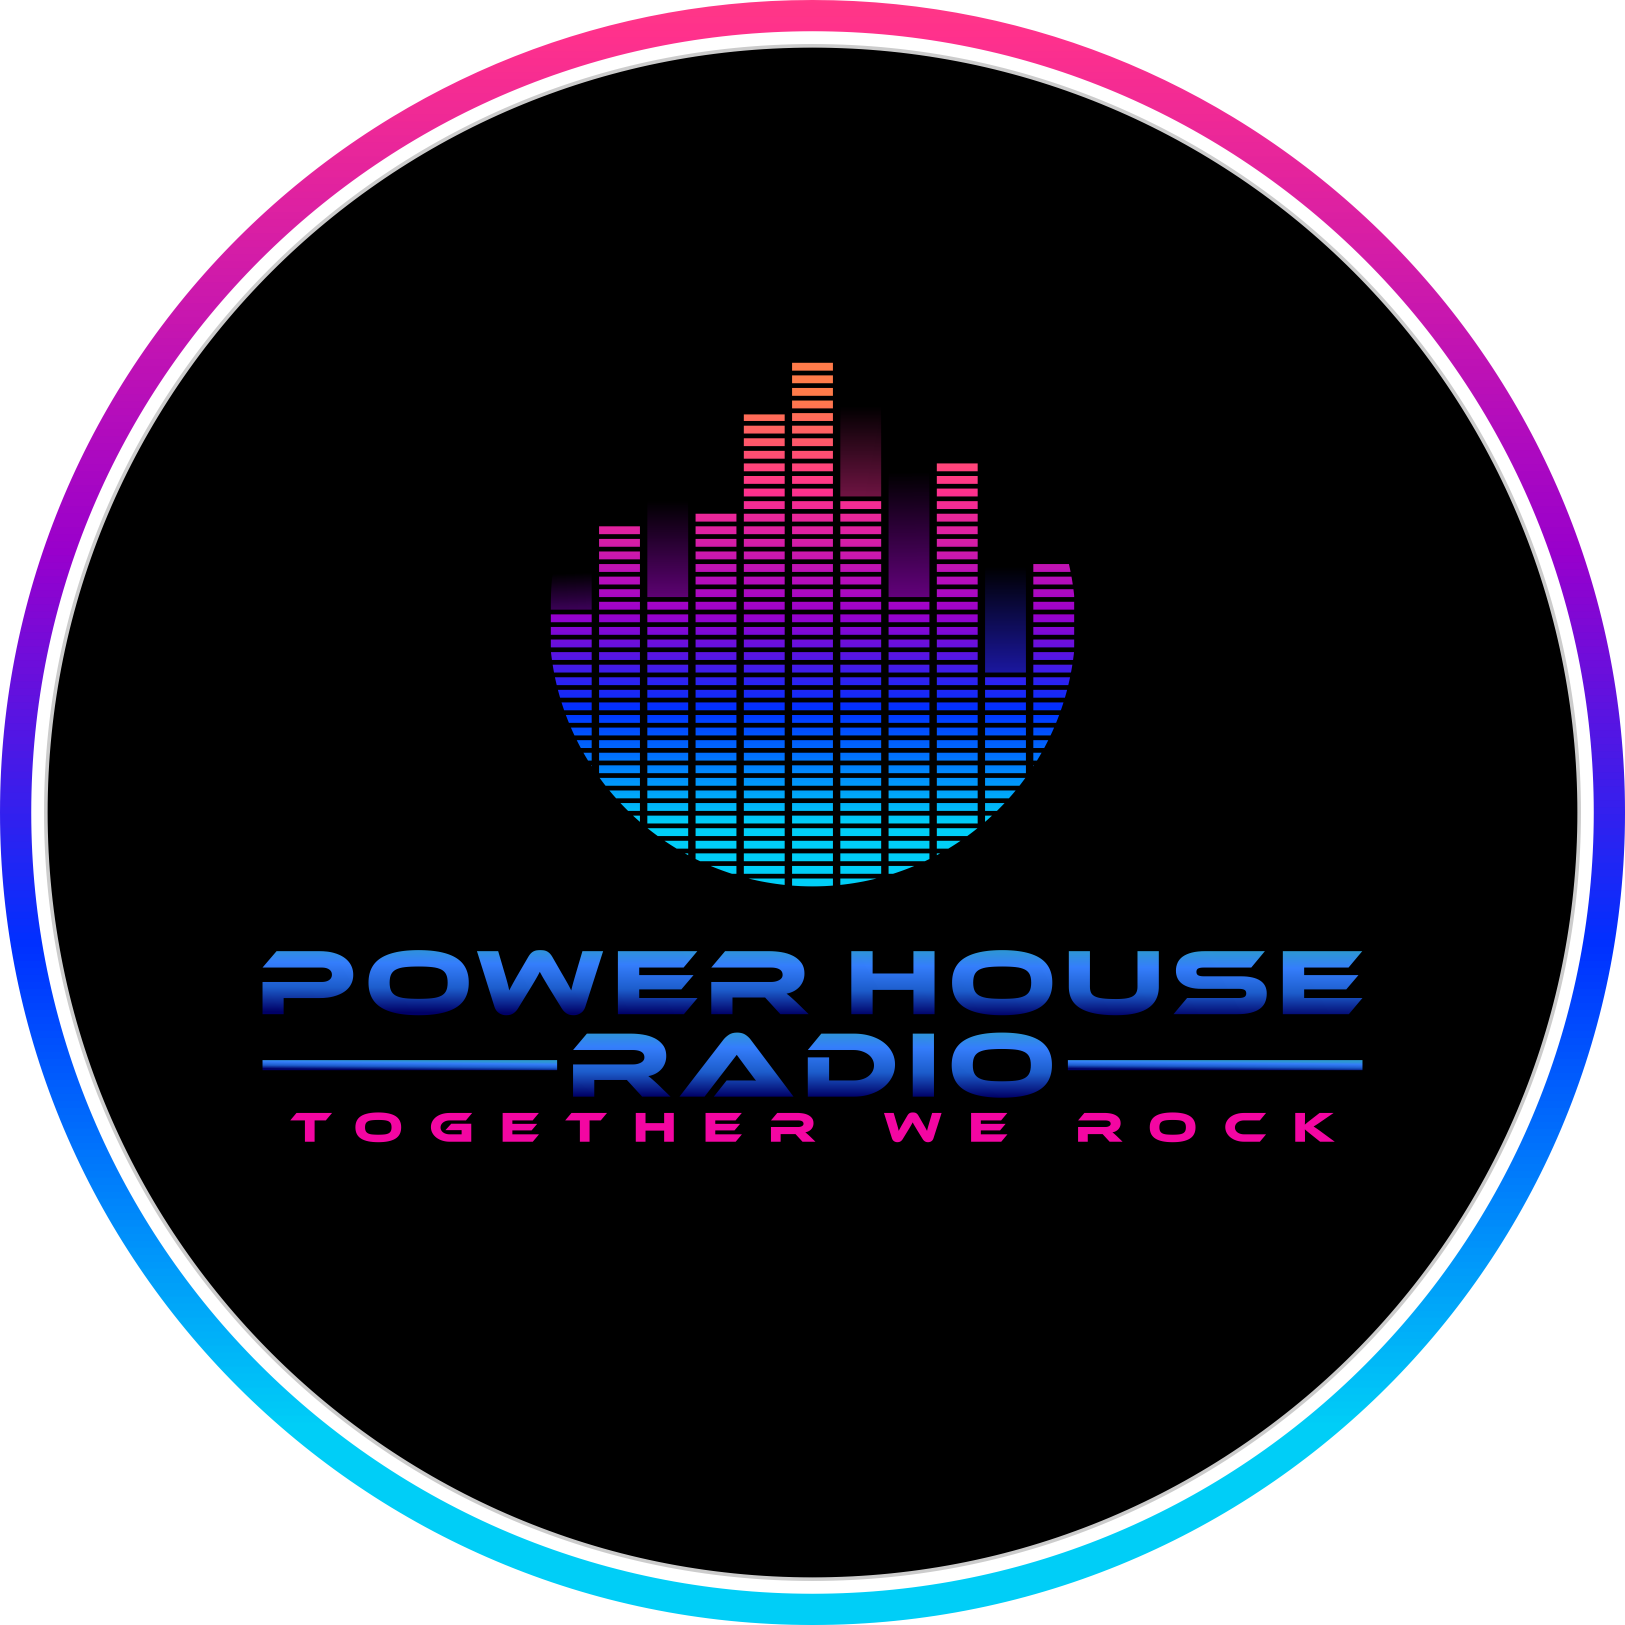 Art for POWERHOUSE1 by Untitled Artist